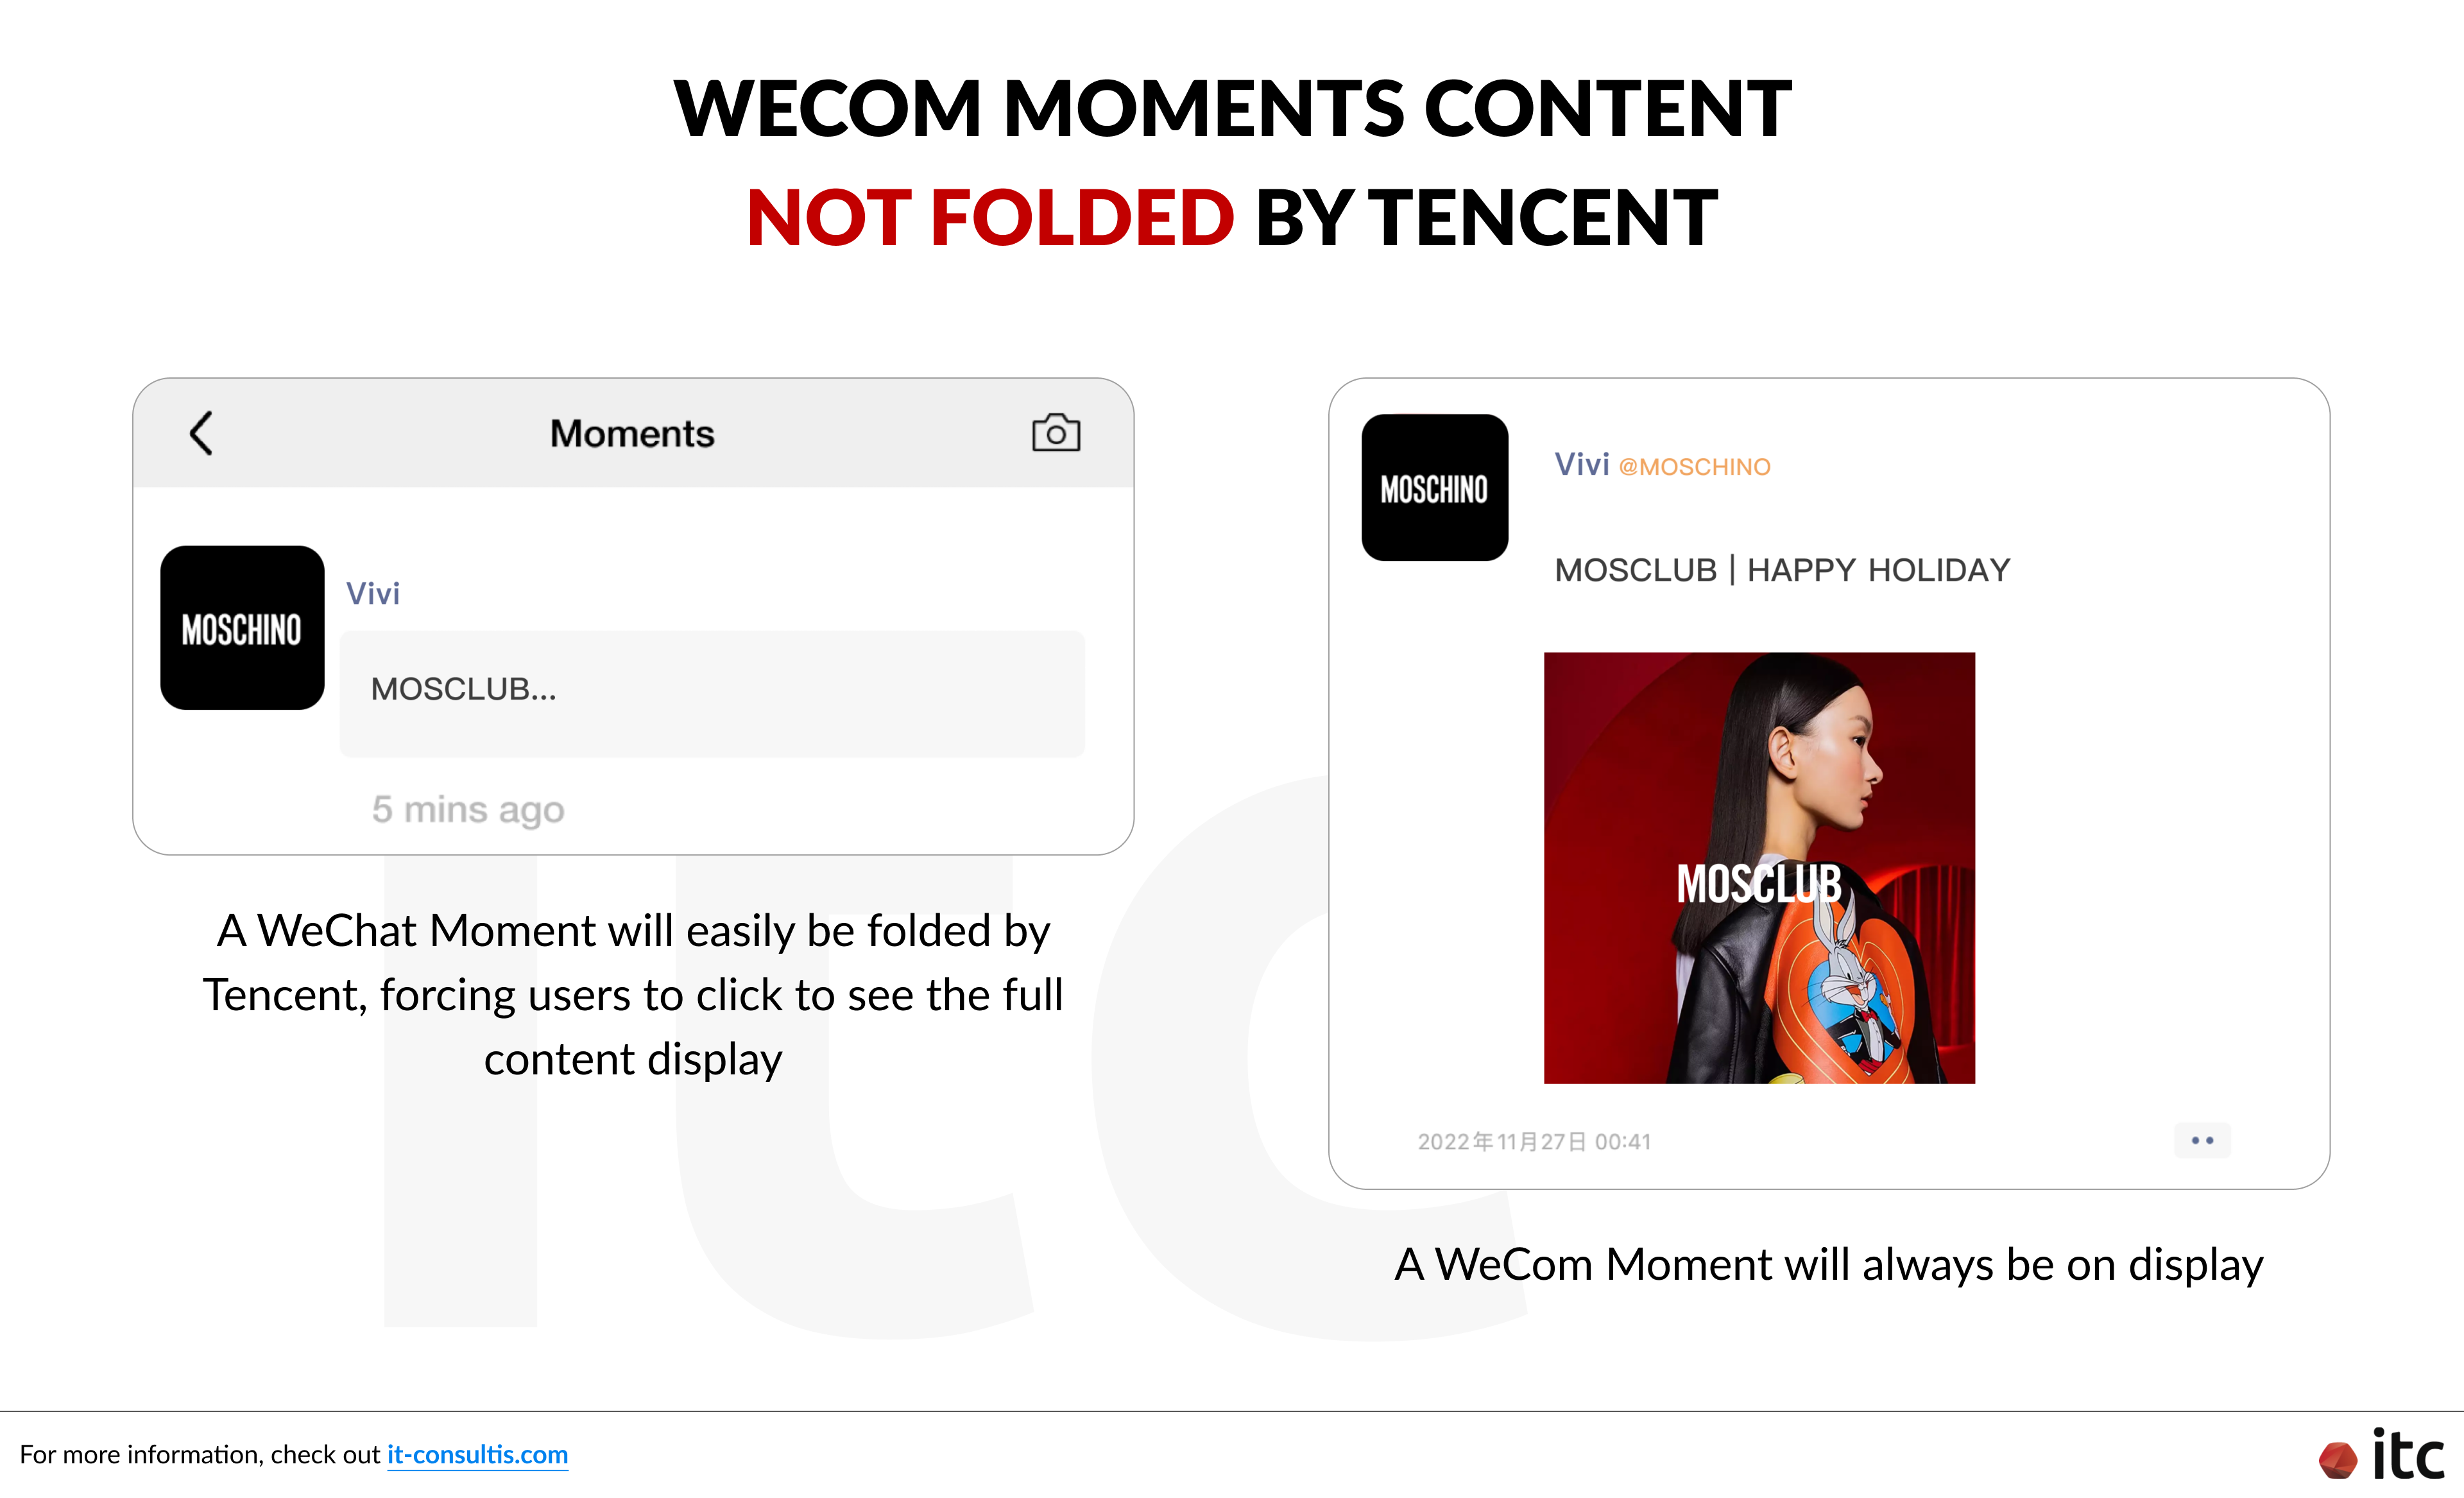 WeCom Moments content does not get folded by Tencent